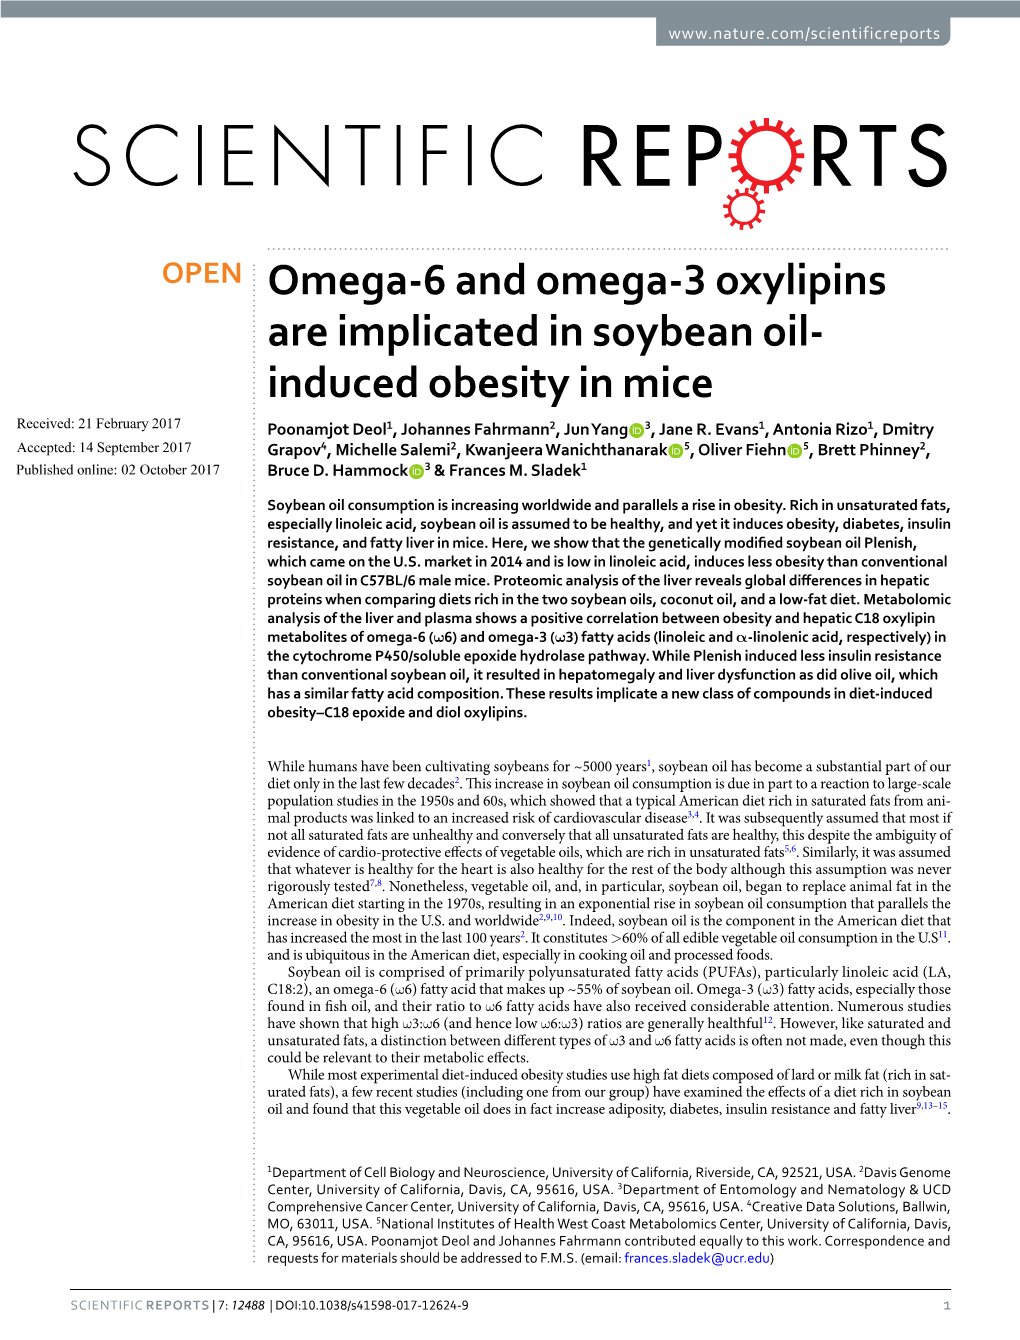 Omega-6 and Omega-3 Oxylipins Are Implicated in Soybean Oil-Induced